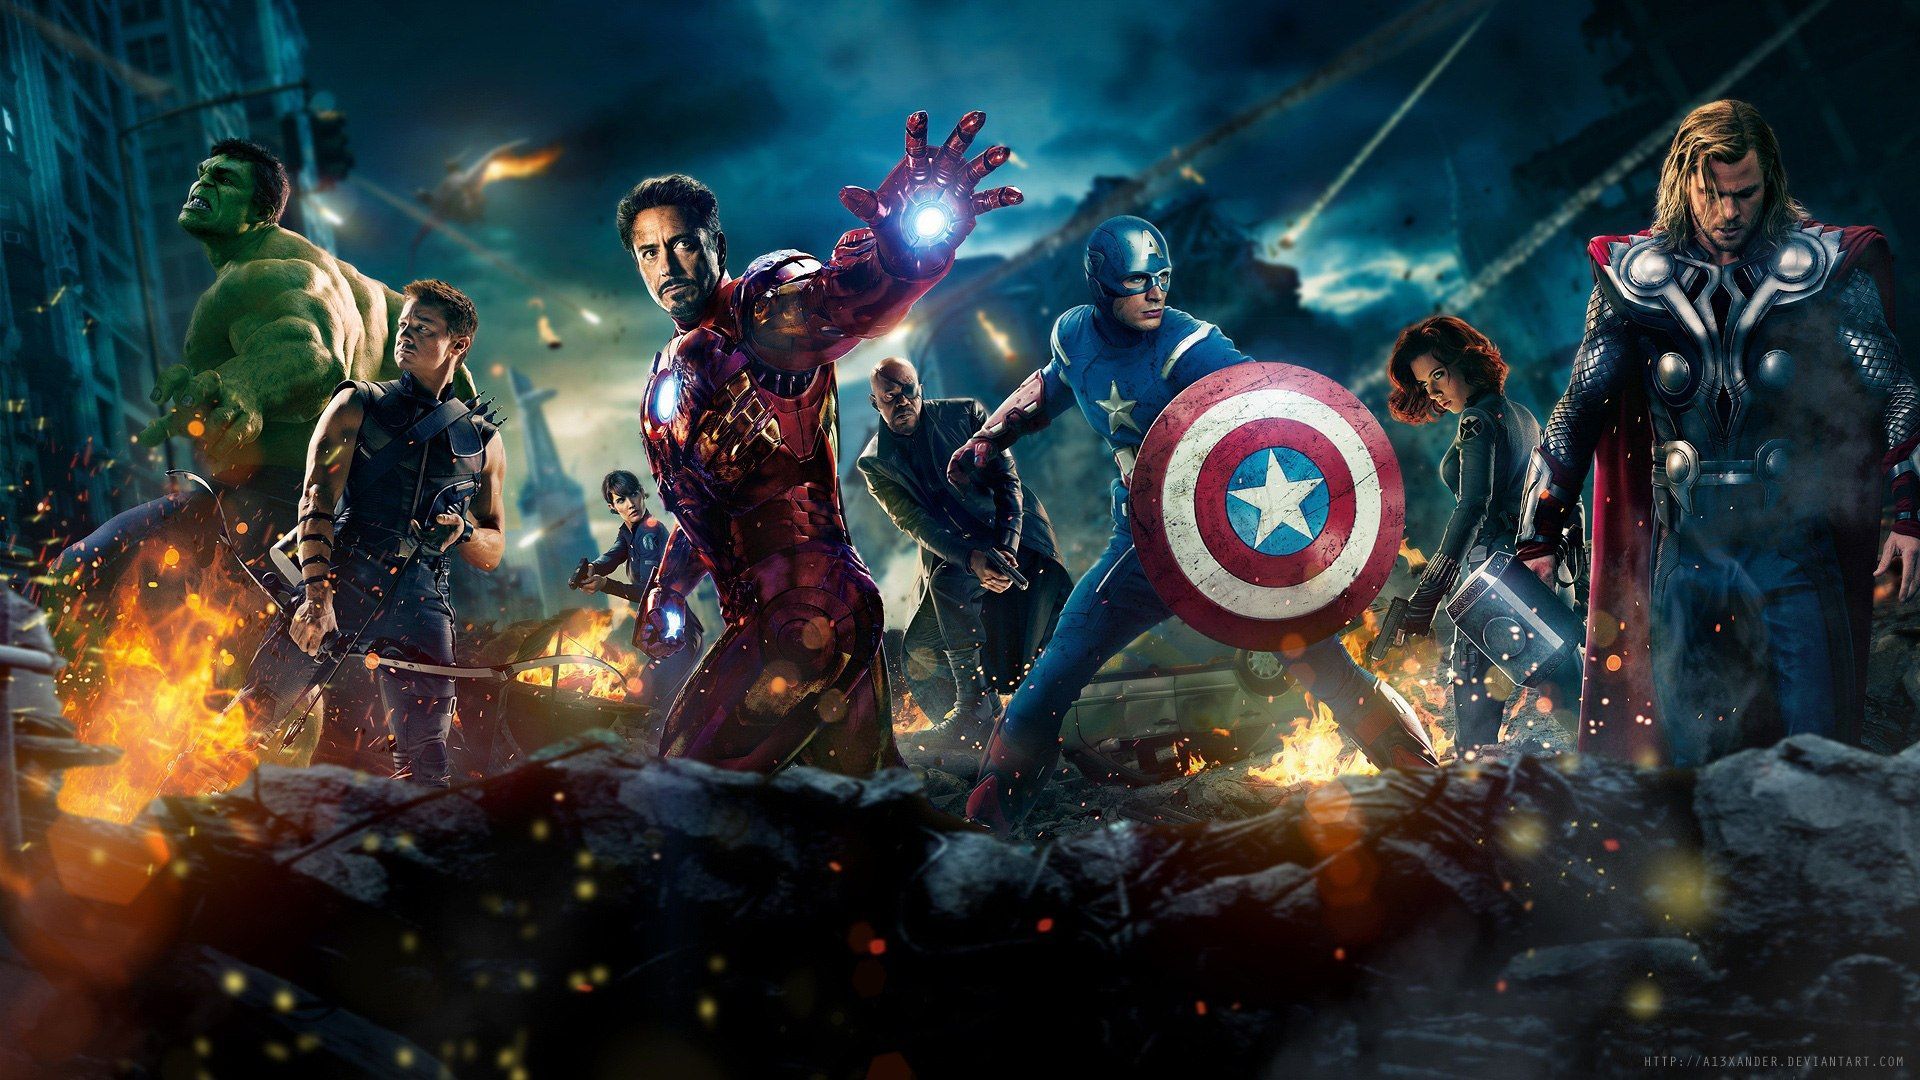 Iron man avengers the movie download full hd 1080p wallpaper ...